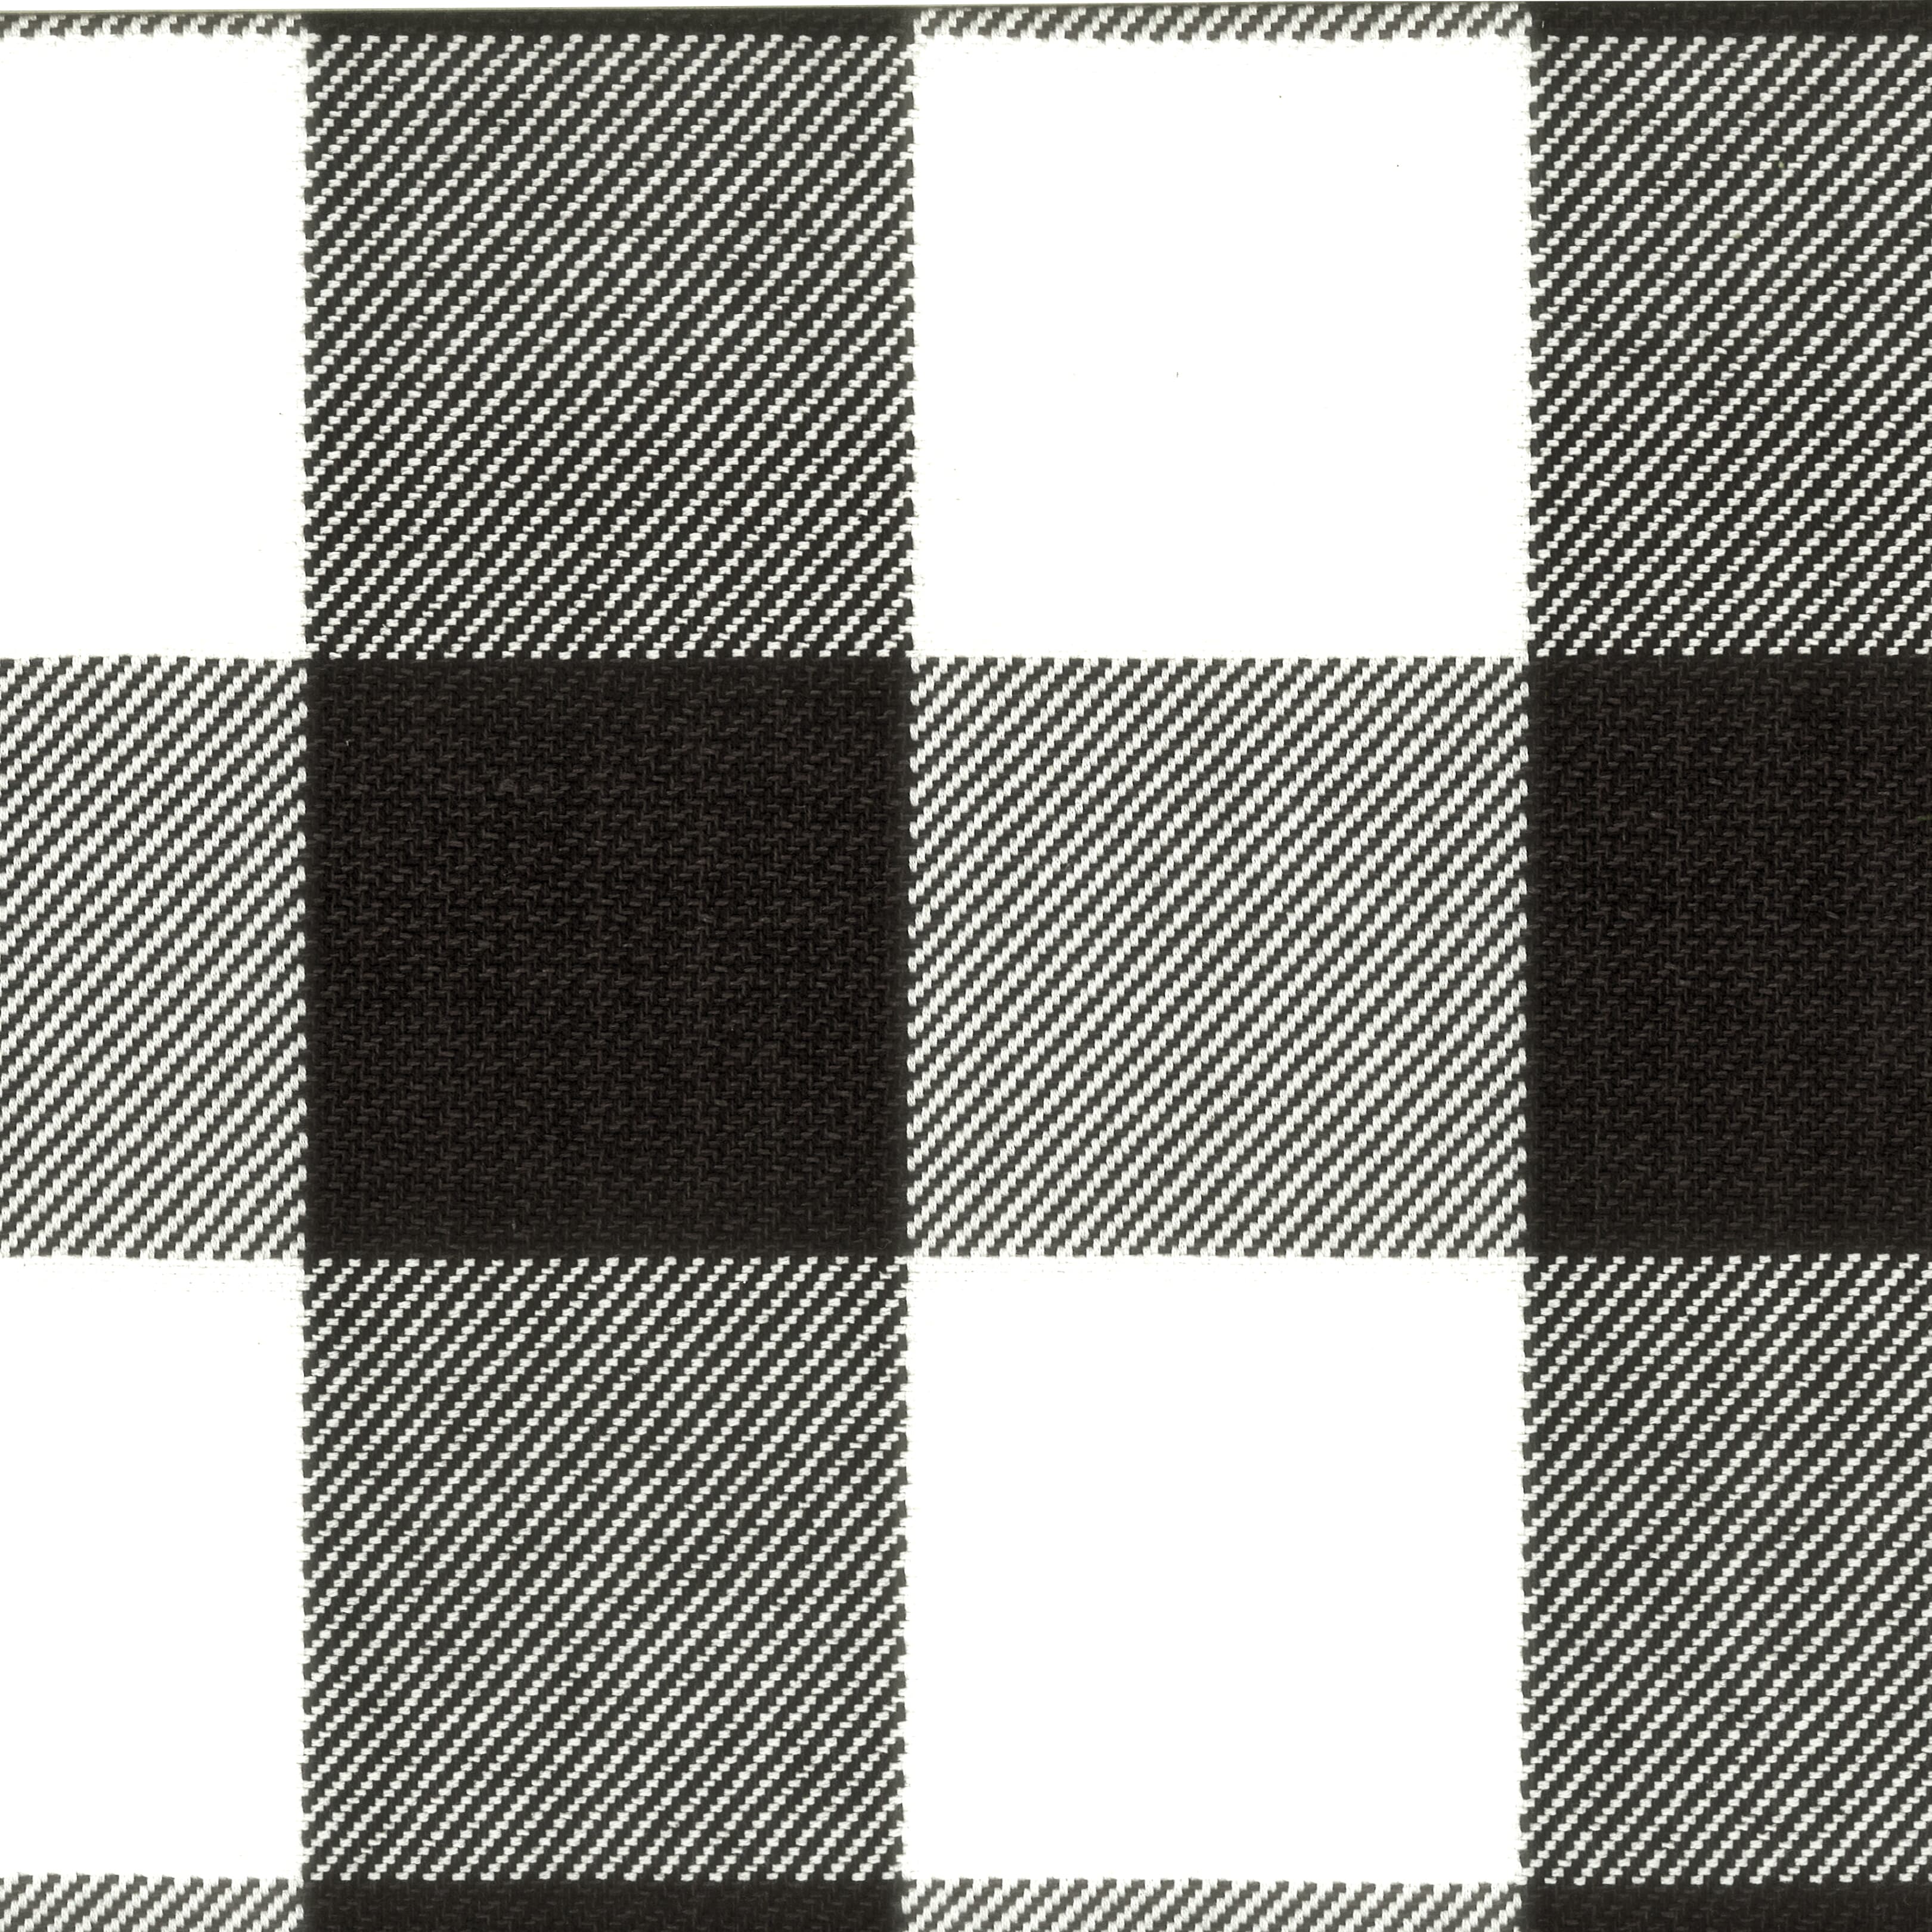 Uriah 1 Checkerboard by Stout Fabric